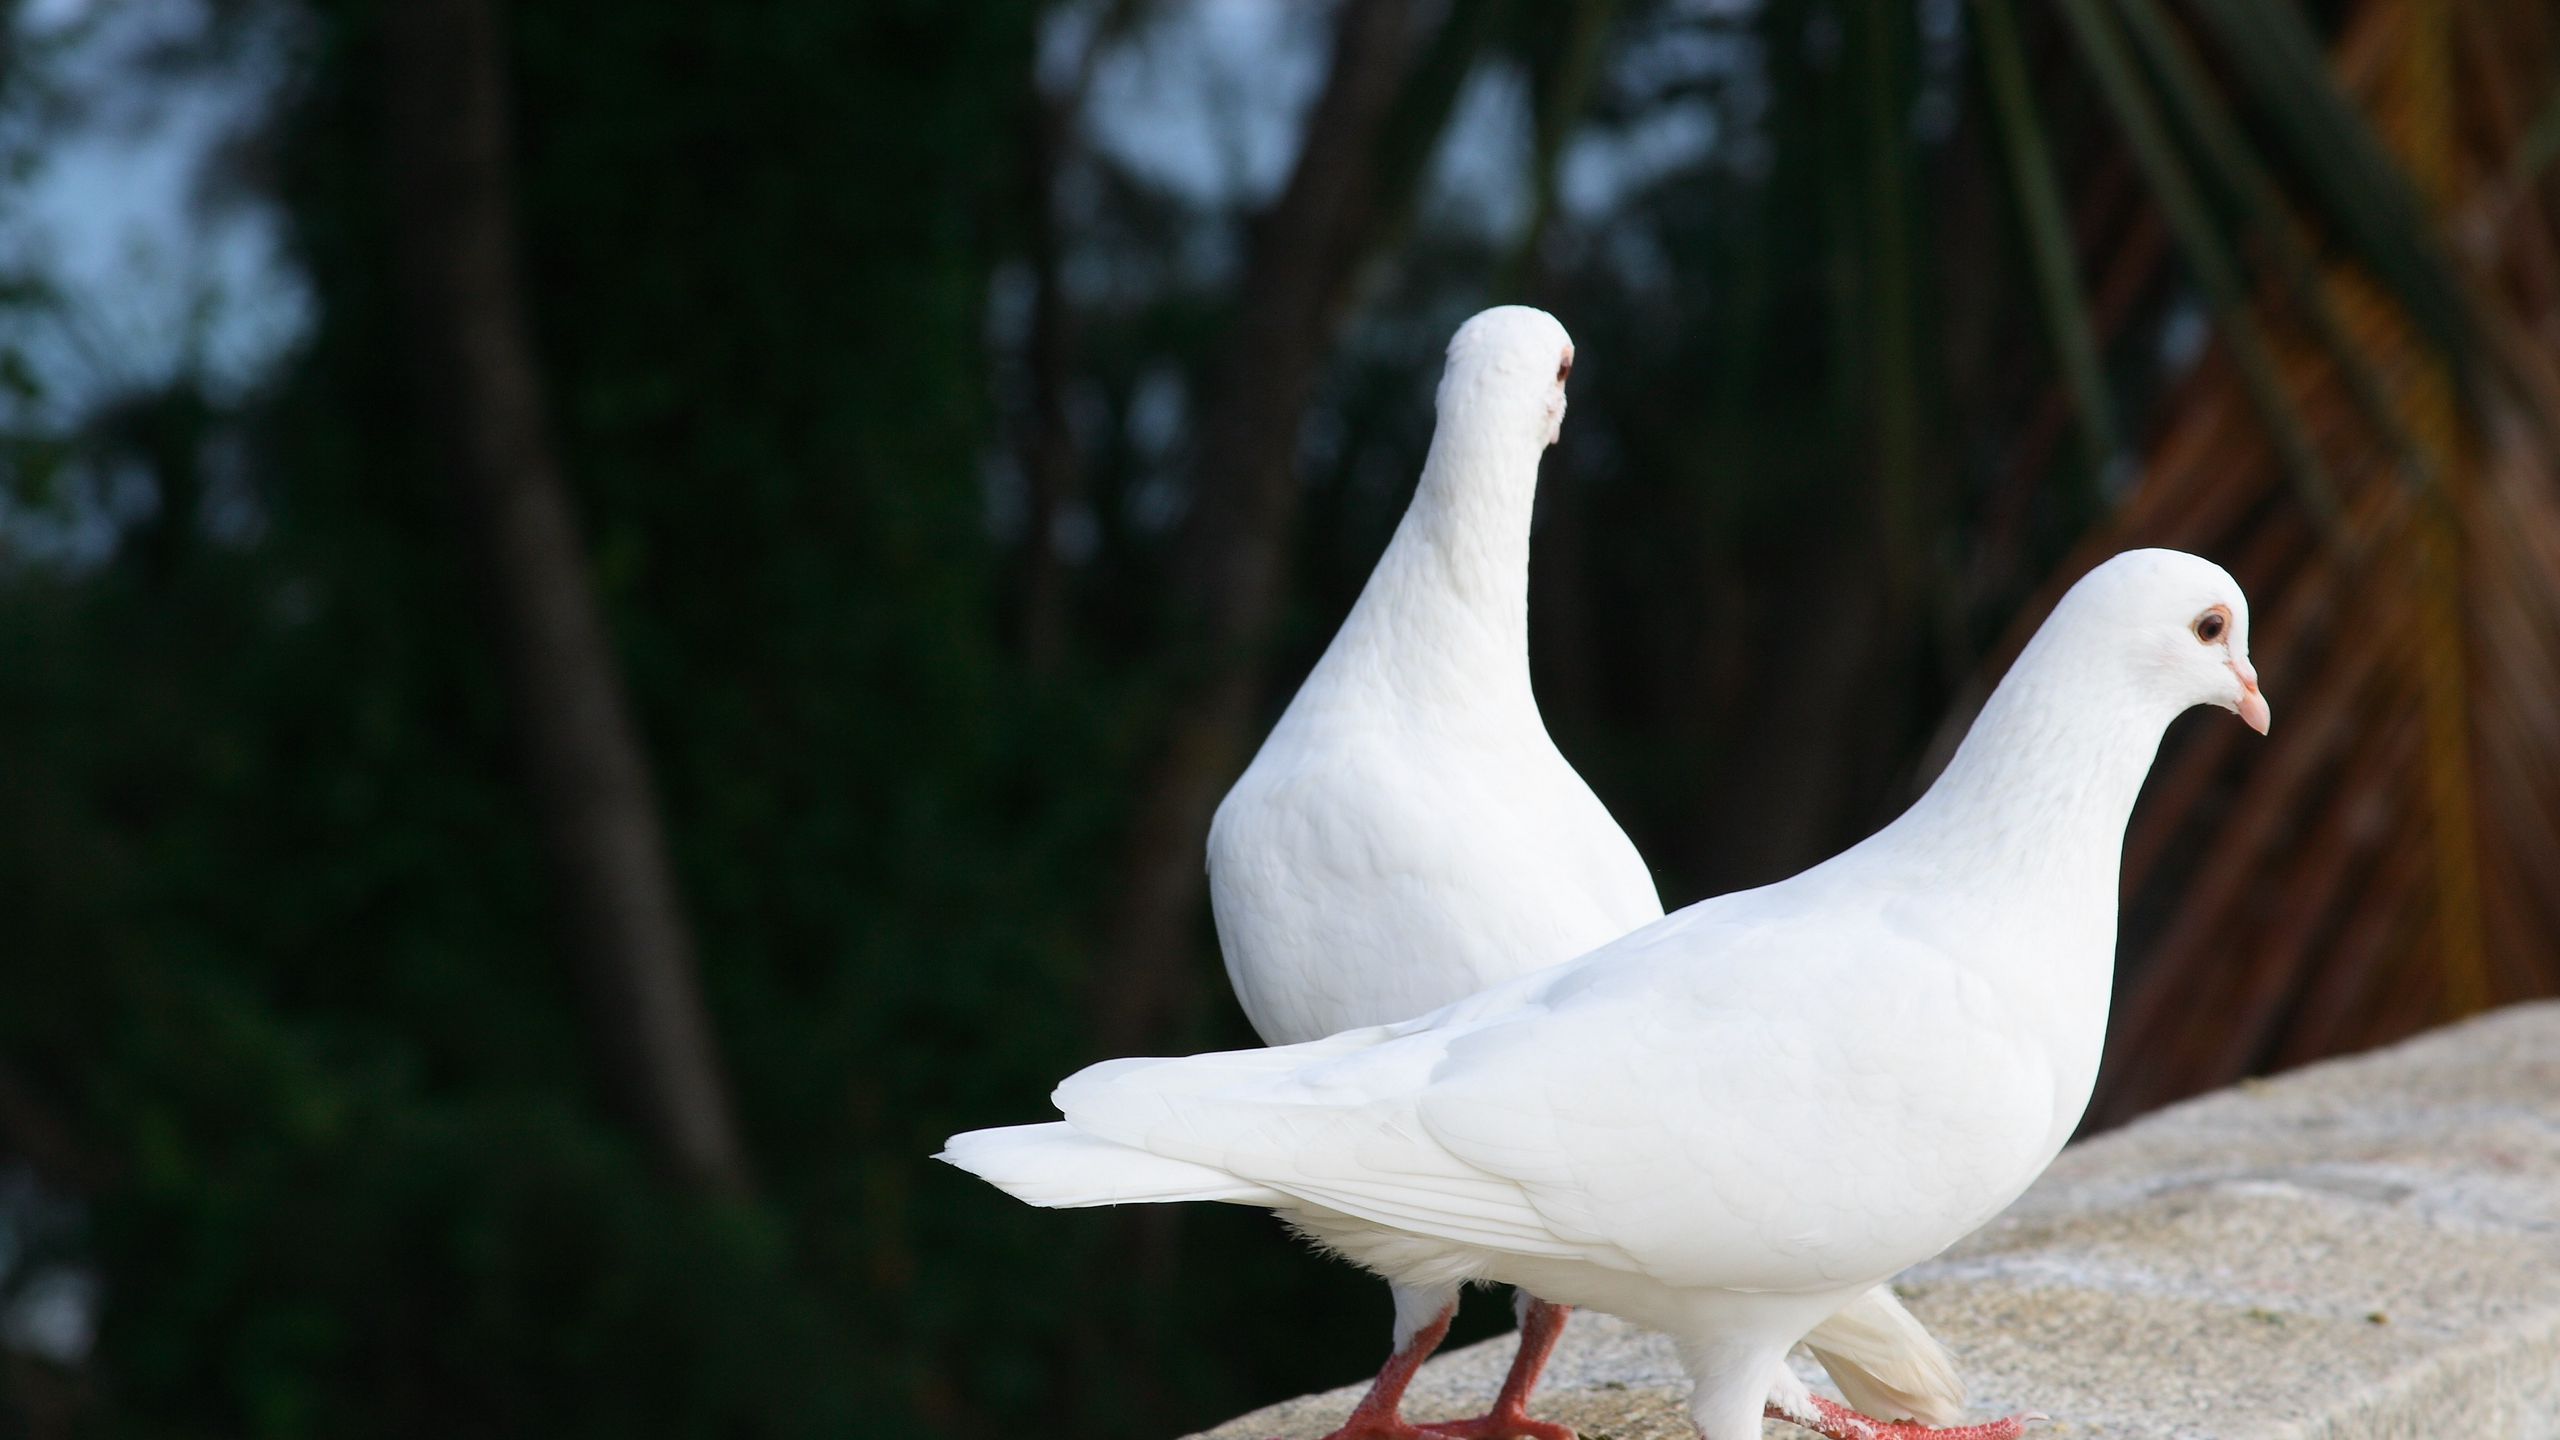 Download wallpaper 2560x1440 pigeons, birds, couple, white widescreen 16:9 HD background